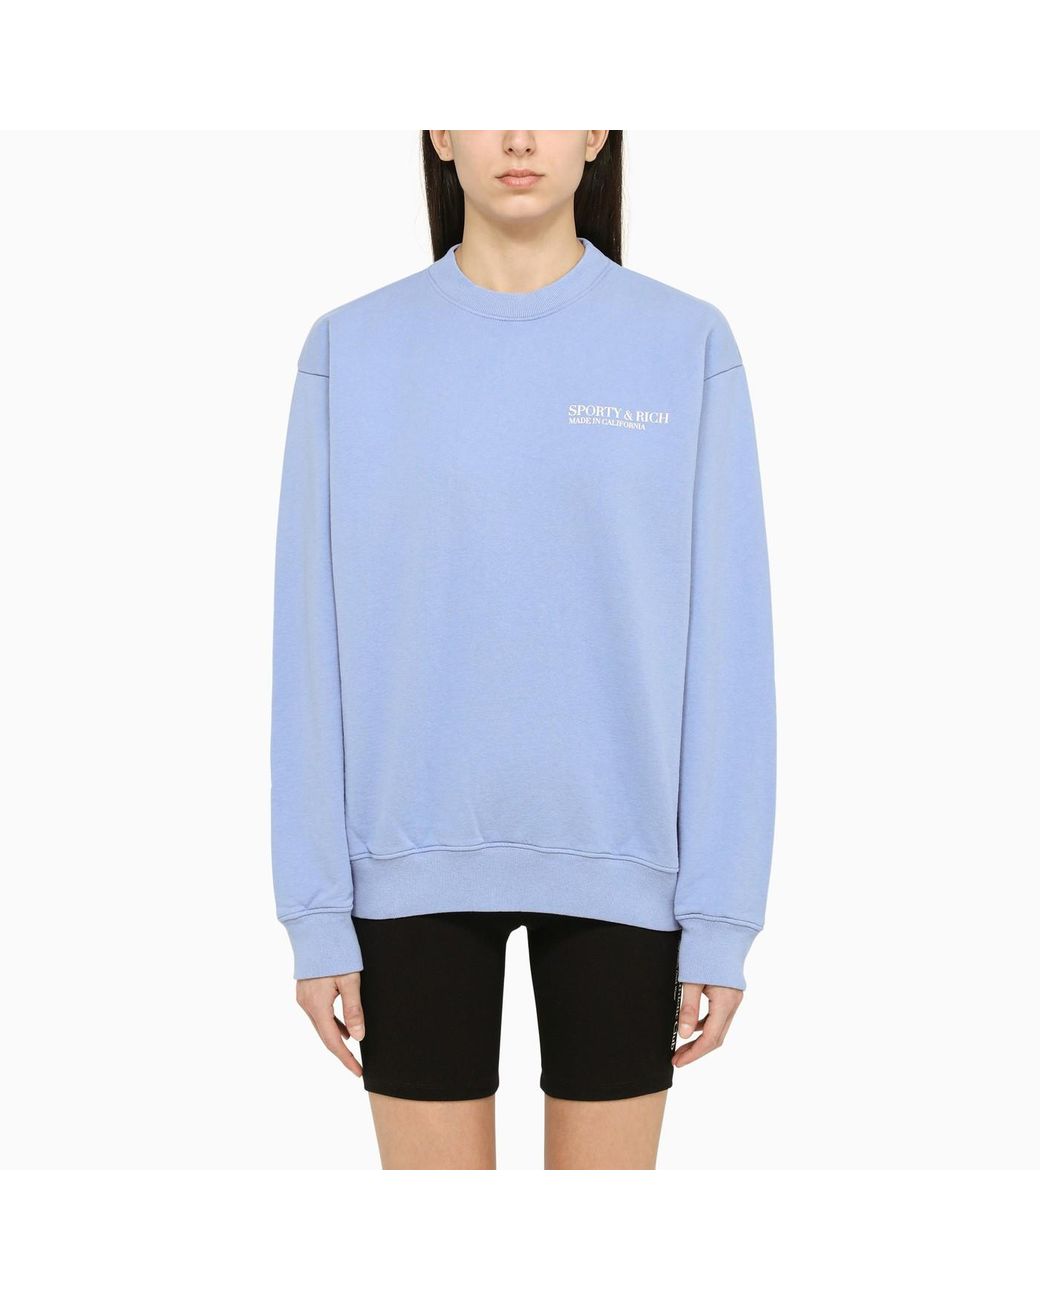 Sporty & Rich Periwinkle Crew Neck Sweatshirt With Logo in Blue